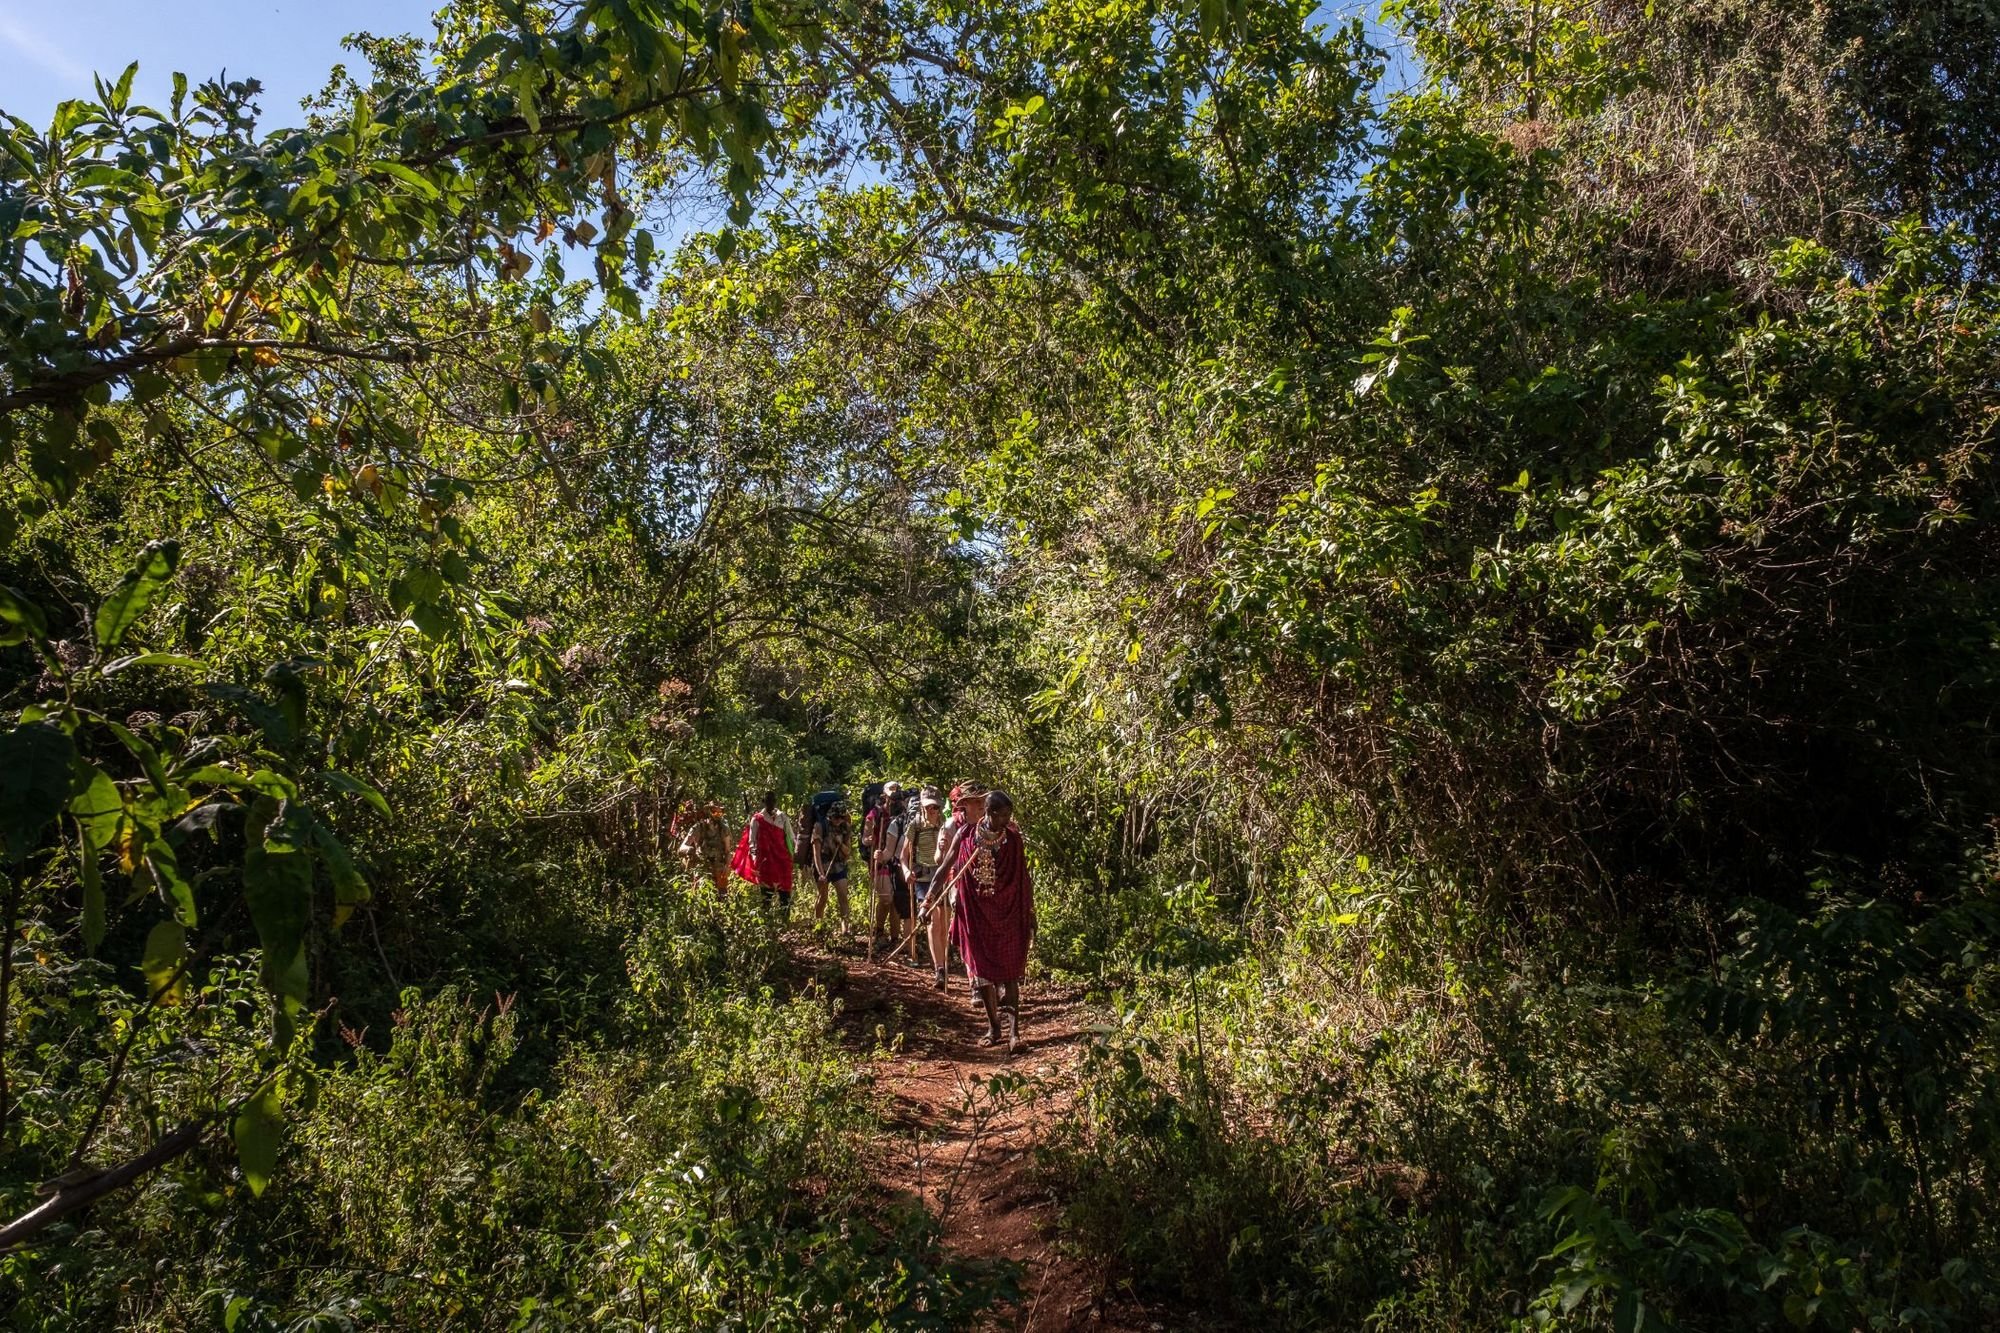 A Maasai guide leads a group of travellers through the forests of the Loita Hills. Photo: Much Better Adventures